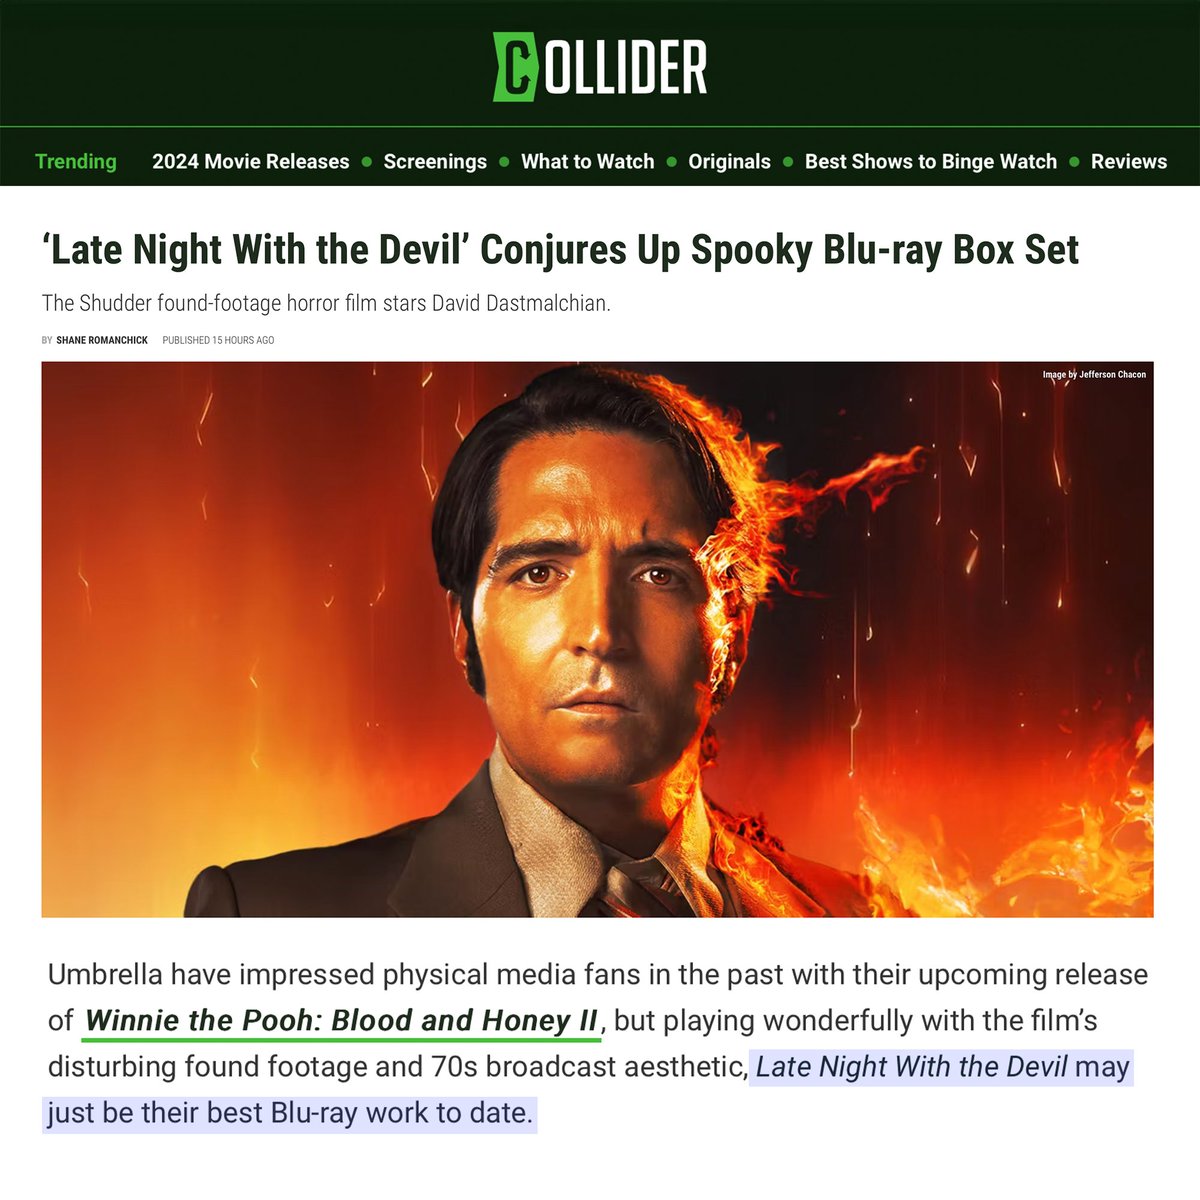 Thrilled to see our release of LATE NIGHT WITH THE DEVIL showcased on @Collider and the awesome reaction from our fans! We love to see Australian films thrive and this one is blazing a hot path for many other Aussie genre flicks.